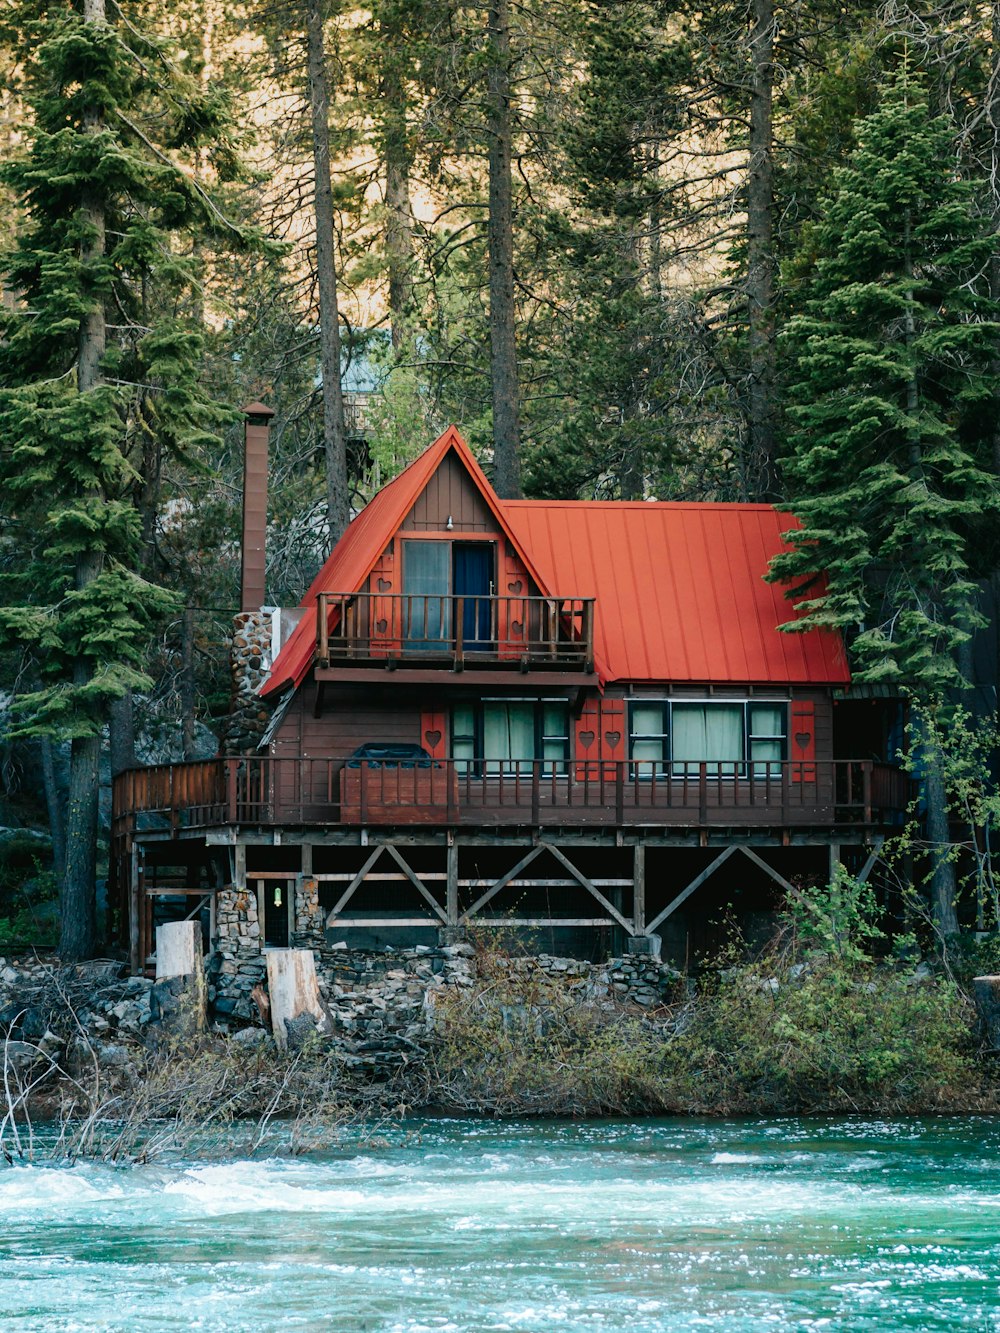 a house with a red roof next to a body of water